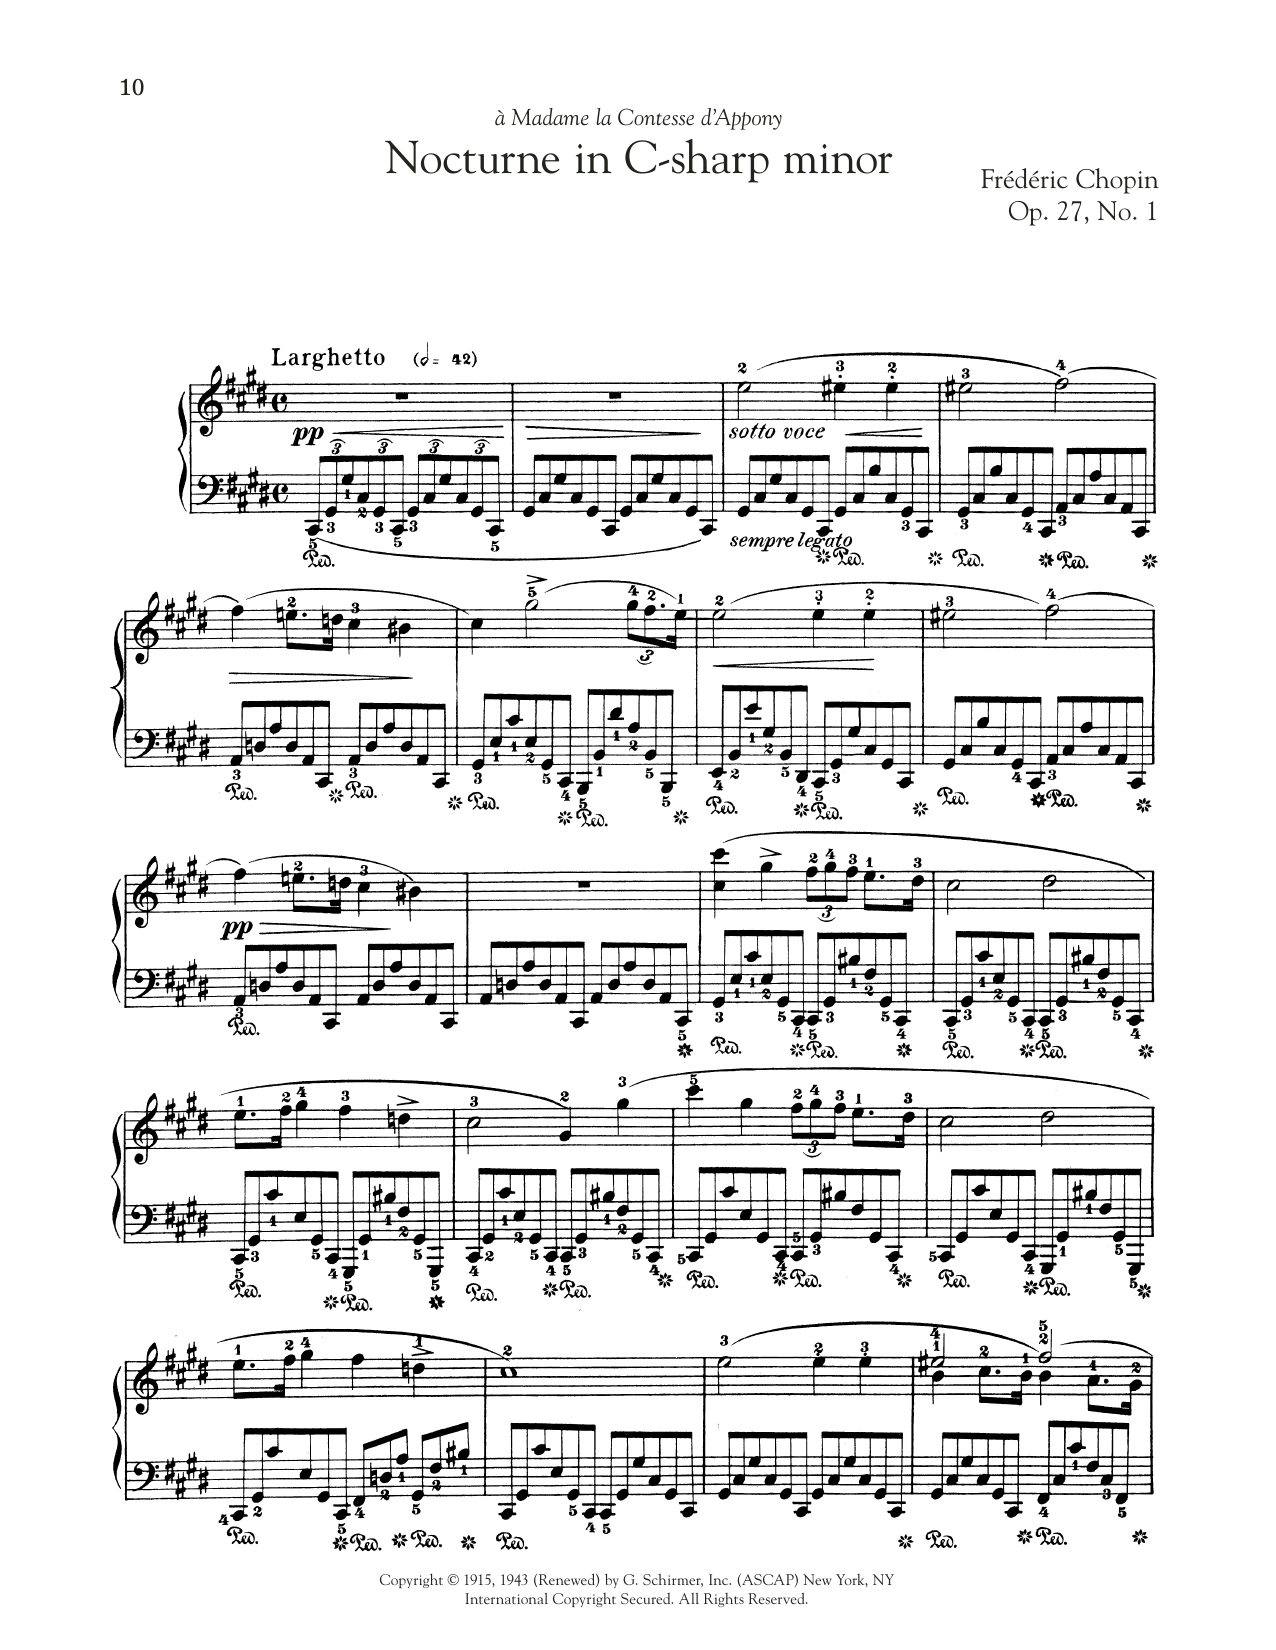 Download Frederic Chopin Nocturne, Op. 27, No. 1 Sheet Music